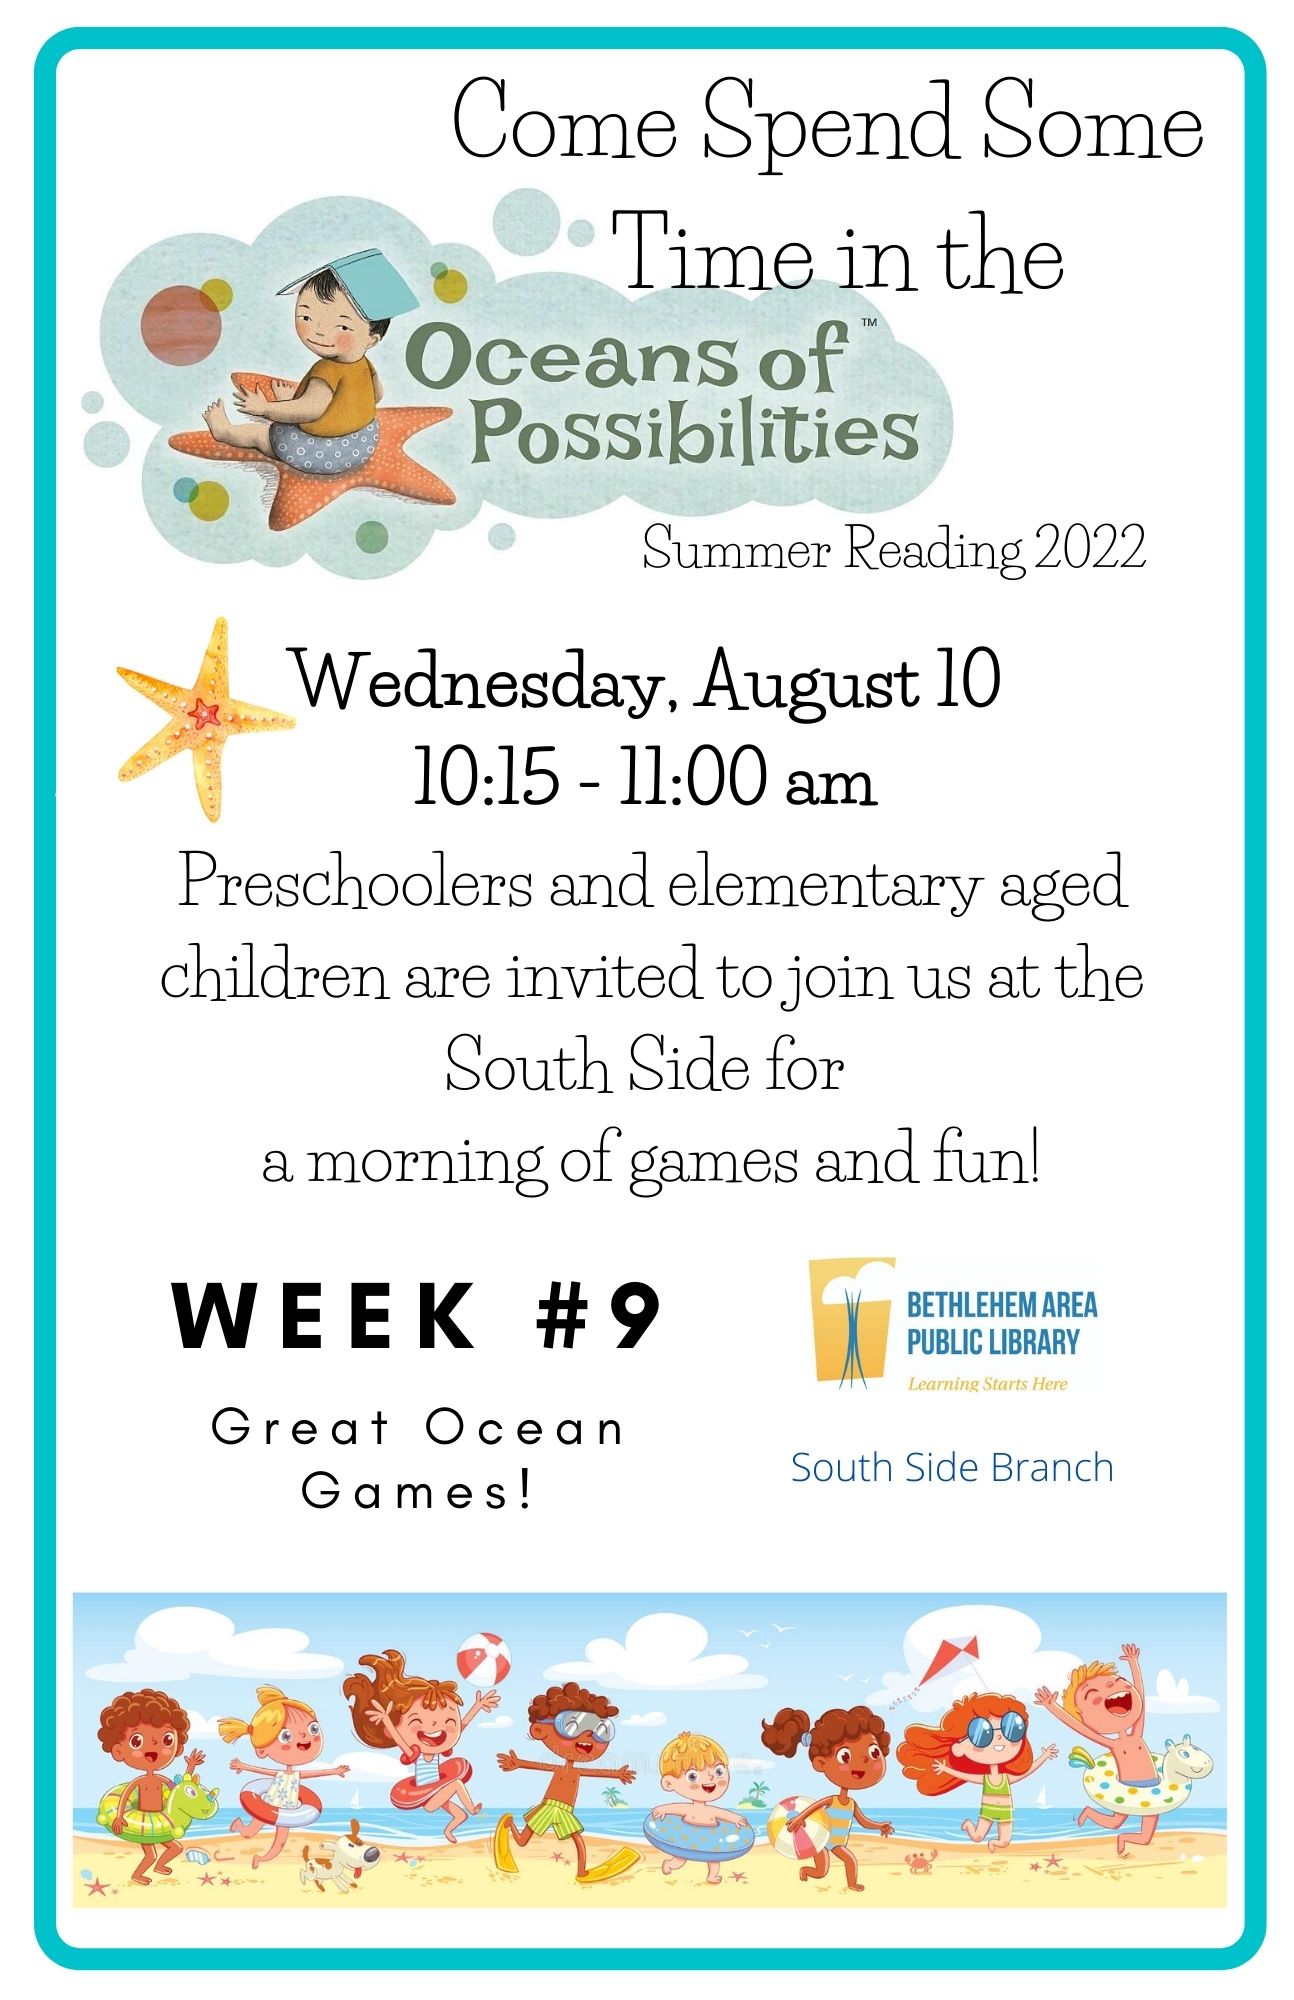 Let's celebrate summer reading with some ocean games!